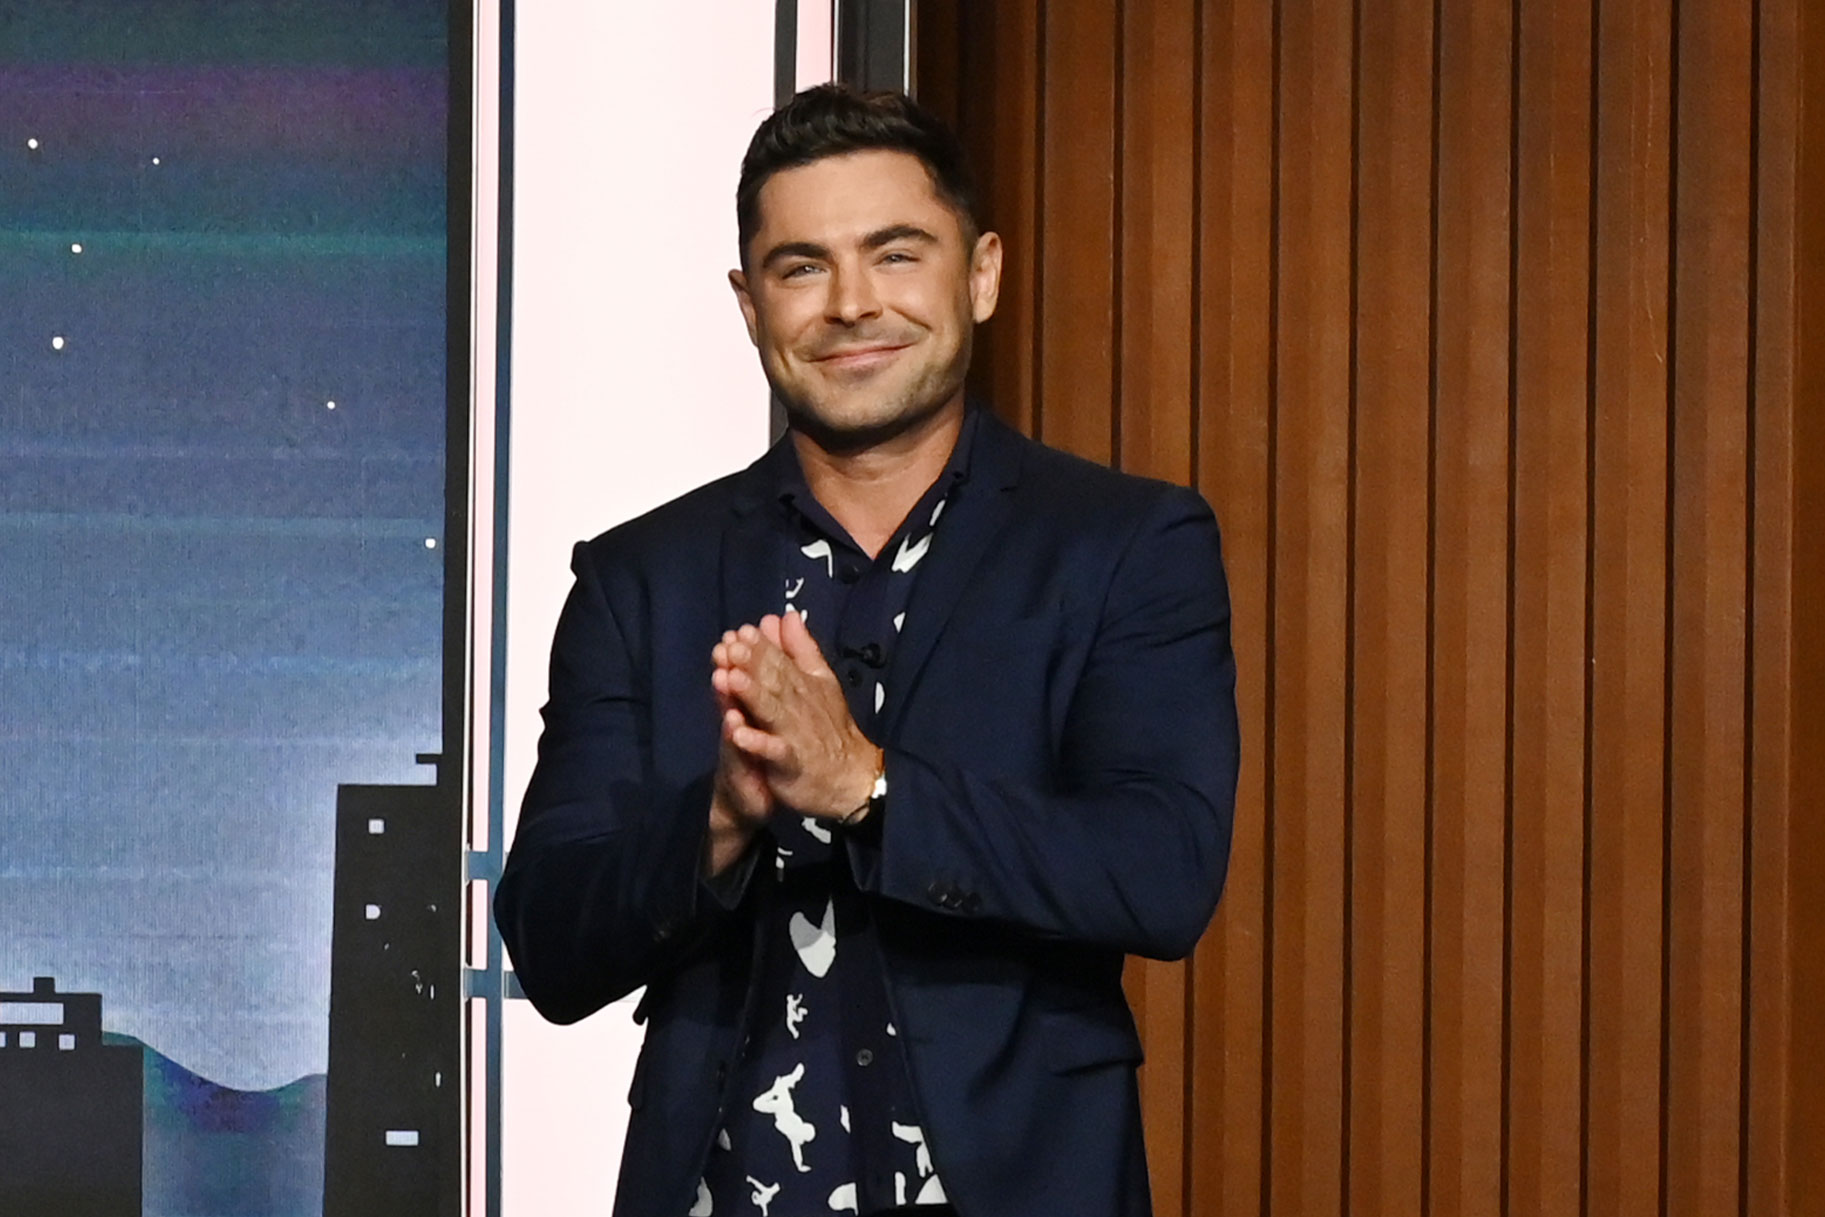 Zac Efron smiling on the set of a late night show